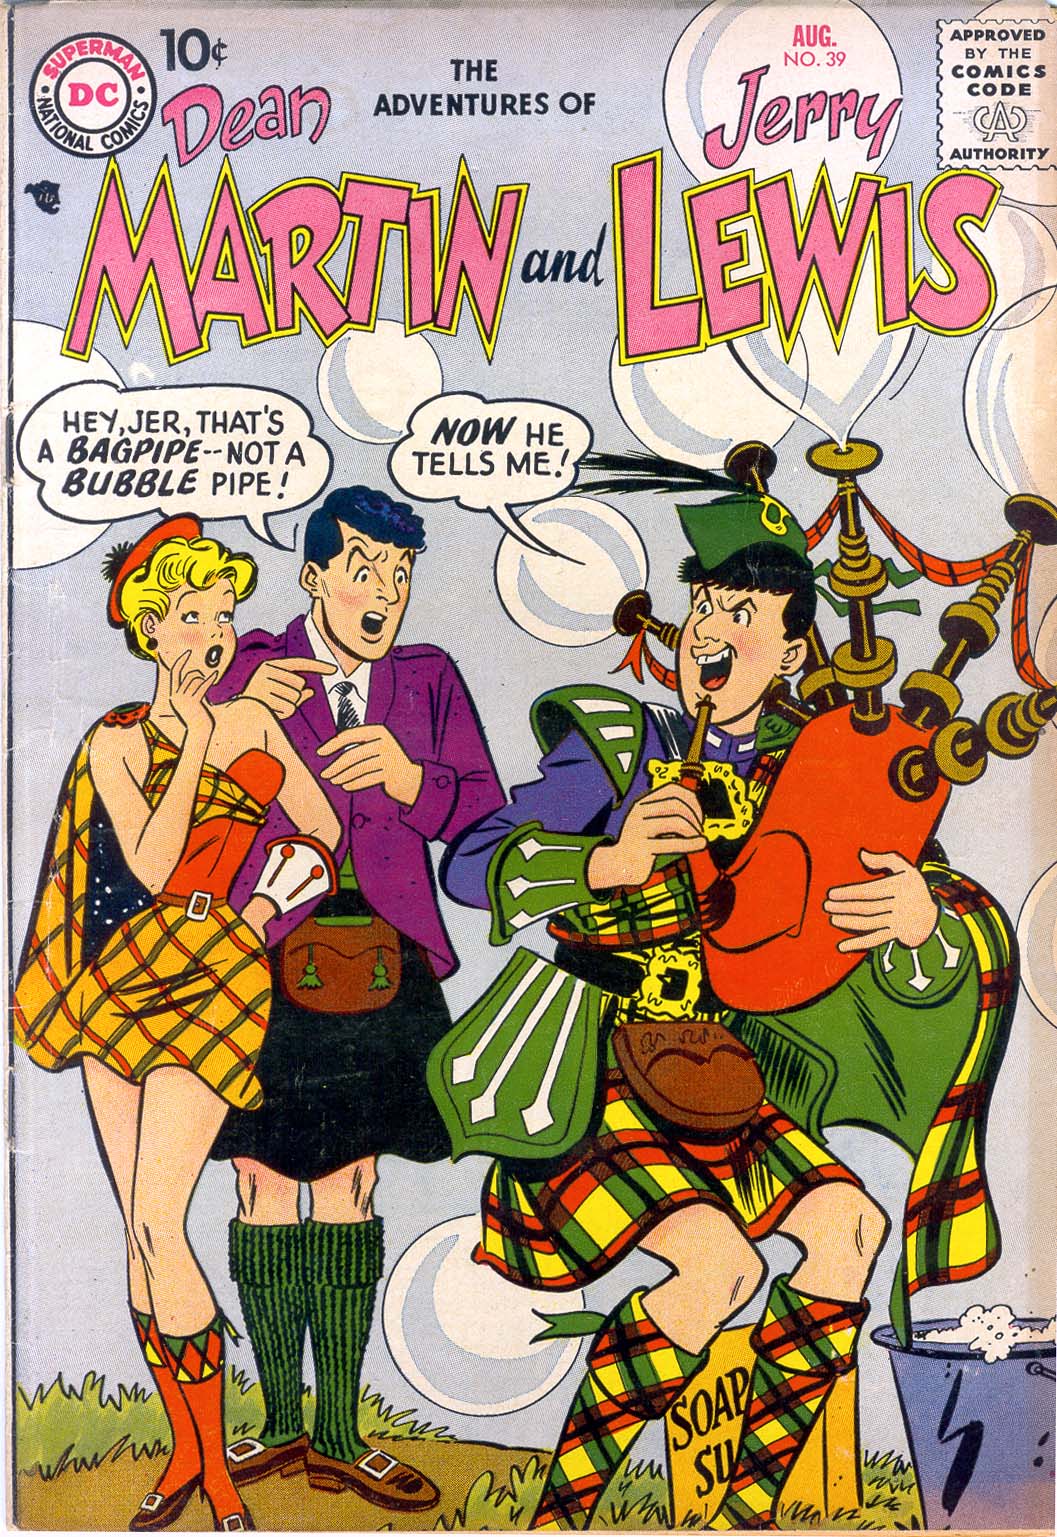 Read online The Adventures of Dean Martin and Jerry Lewis comic -  Issue #39 - 1